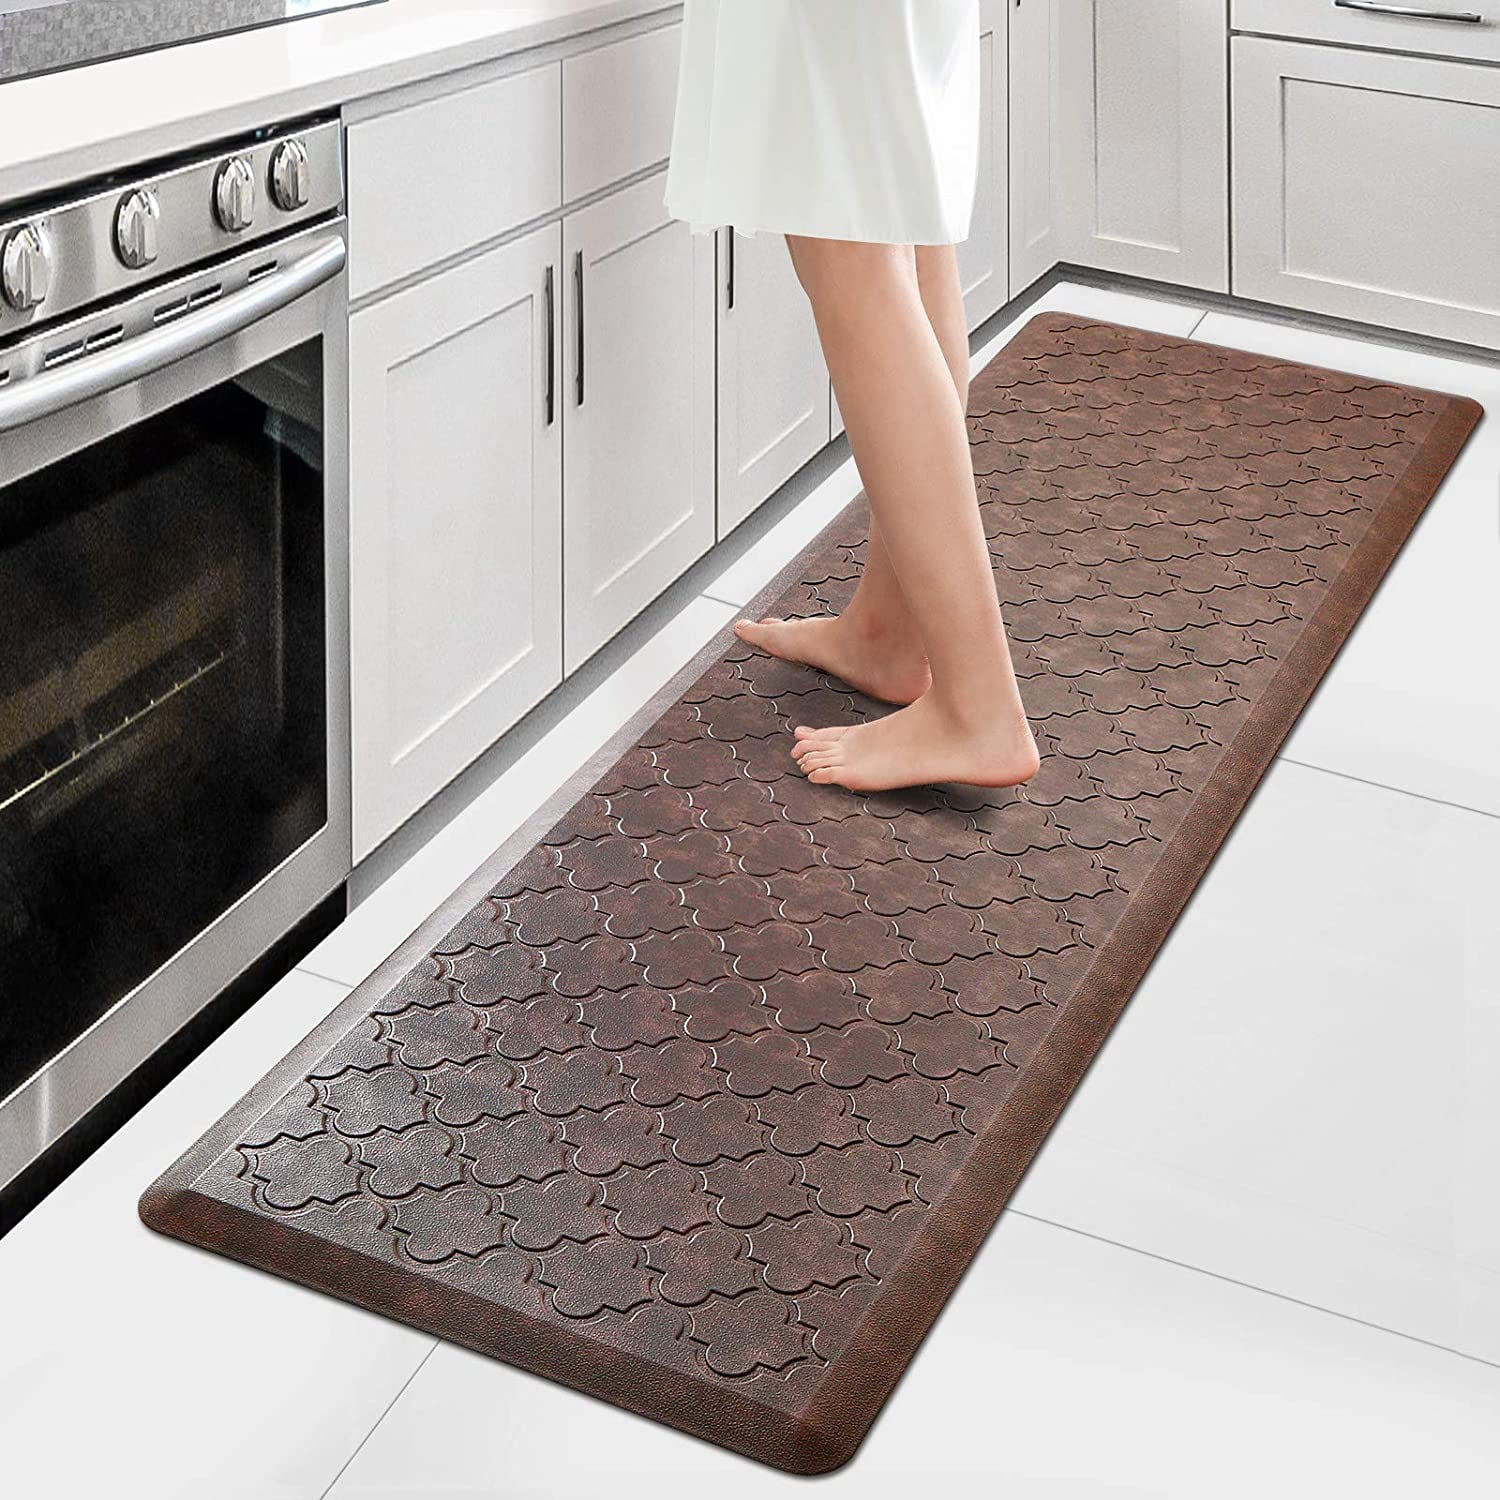 WiseLife Kitchen Mat Cushioned Anti Fatigue Floor Mat,17.3"x59", Thick Non Slip Waterproof